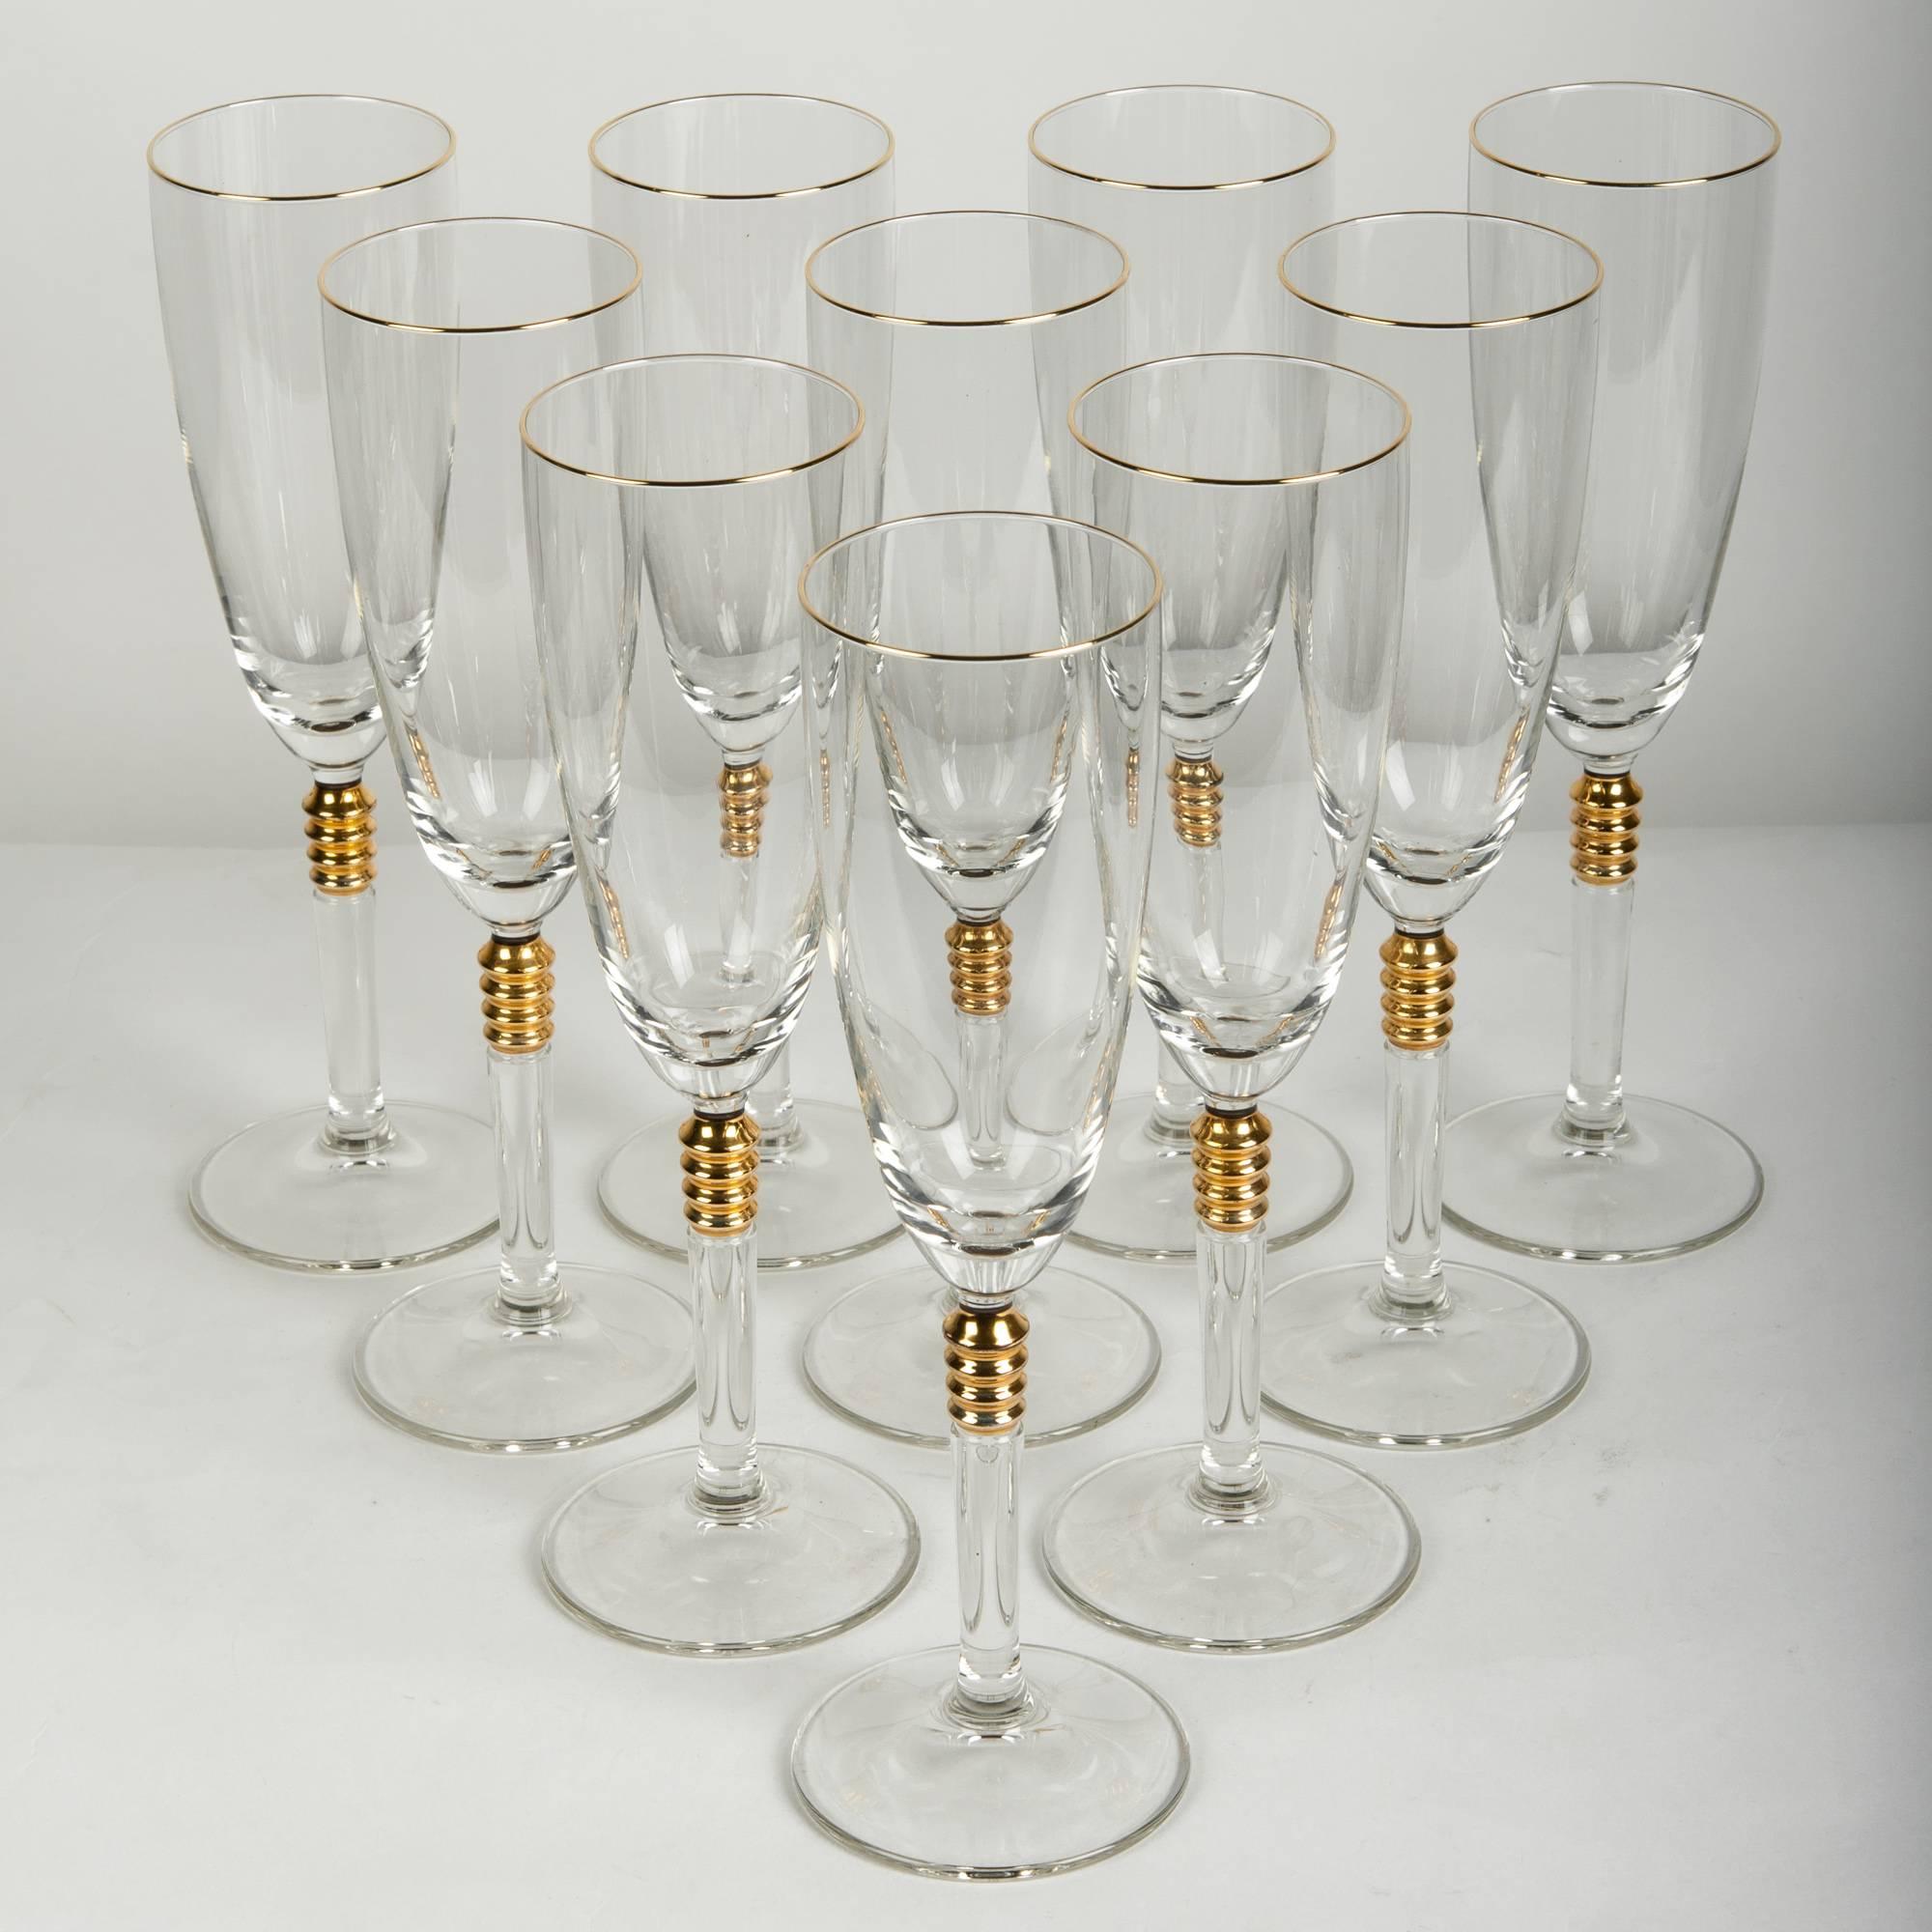 Vintage crystal with gold design details set of twelve champagne / drinks glassware. Each glass is in excellent vintage condition. Just exquisite. Each one measure about 9.3 inches high x 2.5 inches diameter.